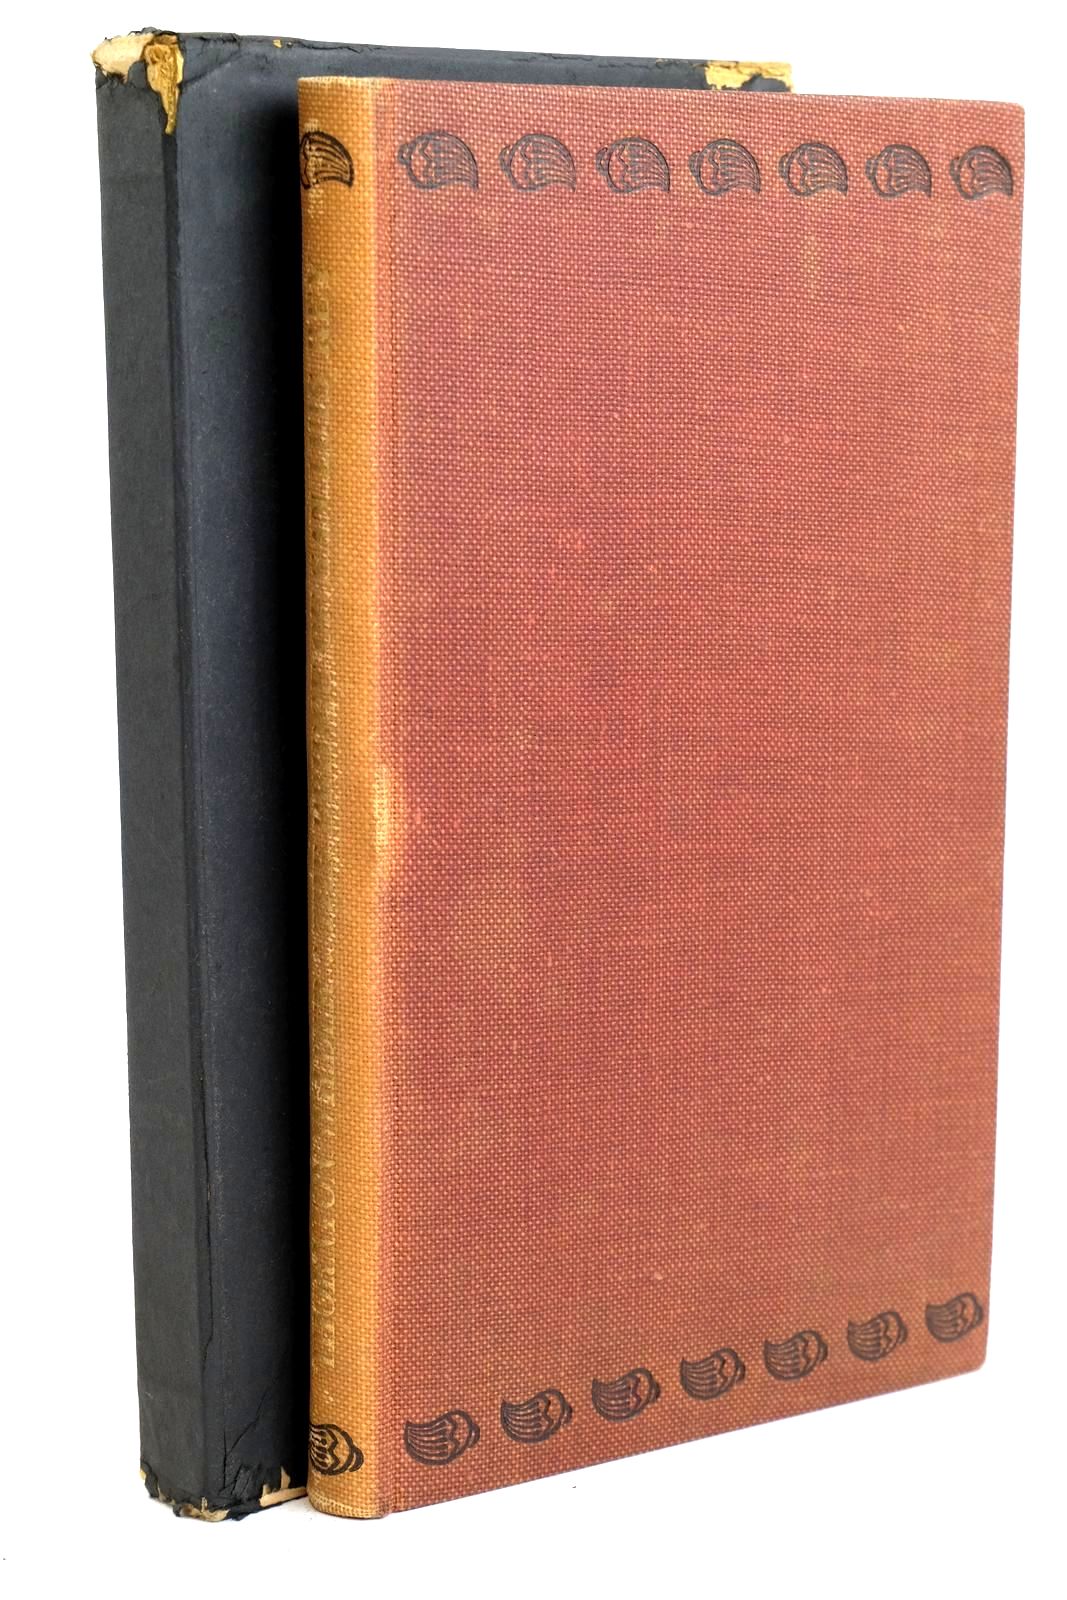 Photo of THE BRIDGE OF SAN LUIS REY written by Wilder, Thornton illustrated by Martin, Frank published by Folio Society (STOCK CODE: 1320564)  for sale by Stella & Rose's Books